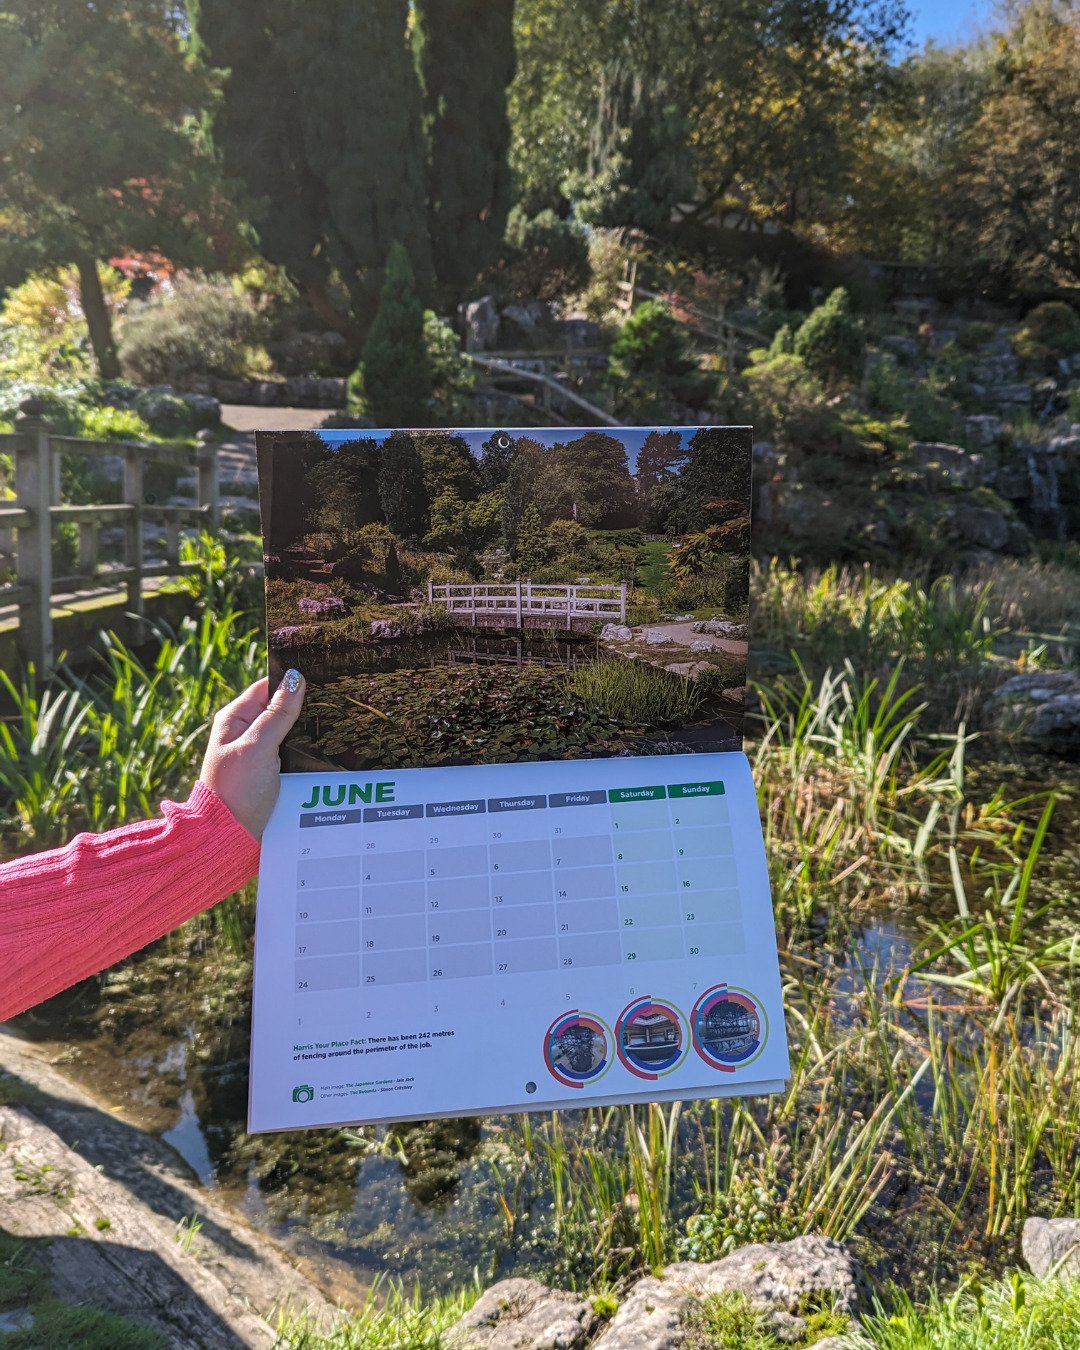 A calendar held up in front of the Japanese gardens at Avenham park